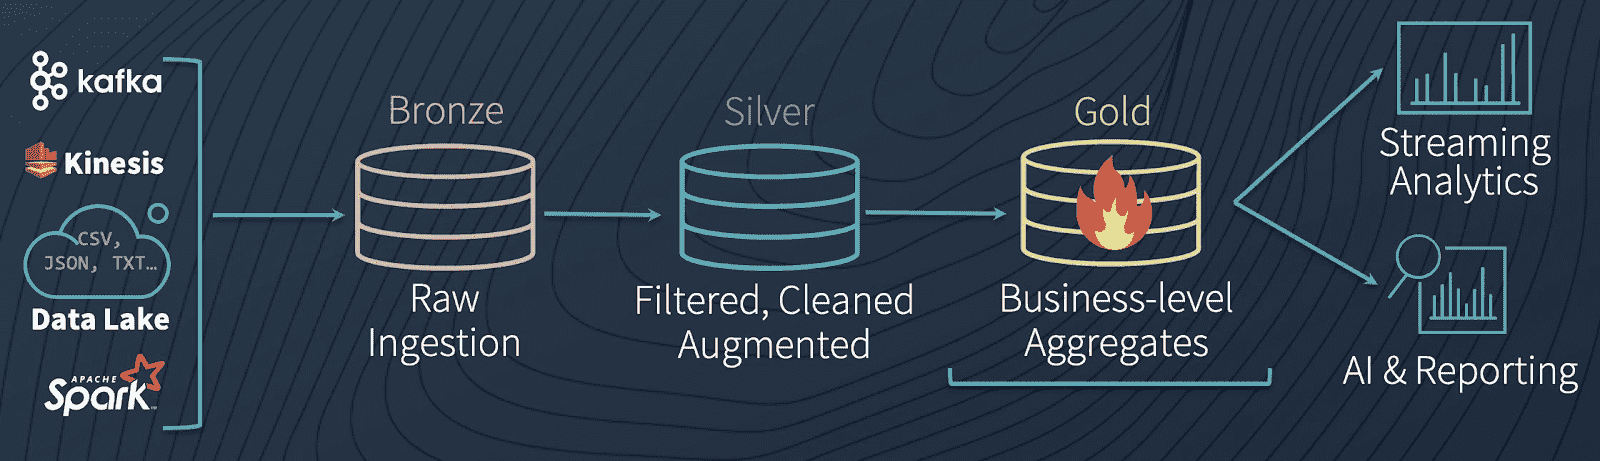 Delta Architecture diagram, highlighting the Gold stage (cleaned data) of the machine learning pipeline.